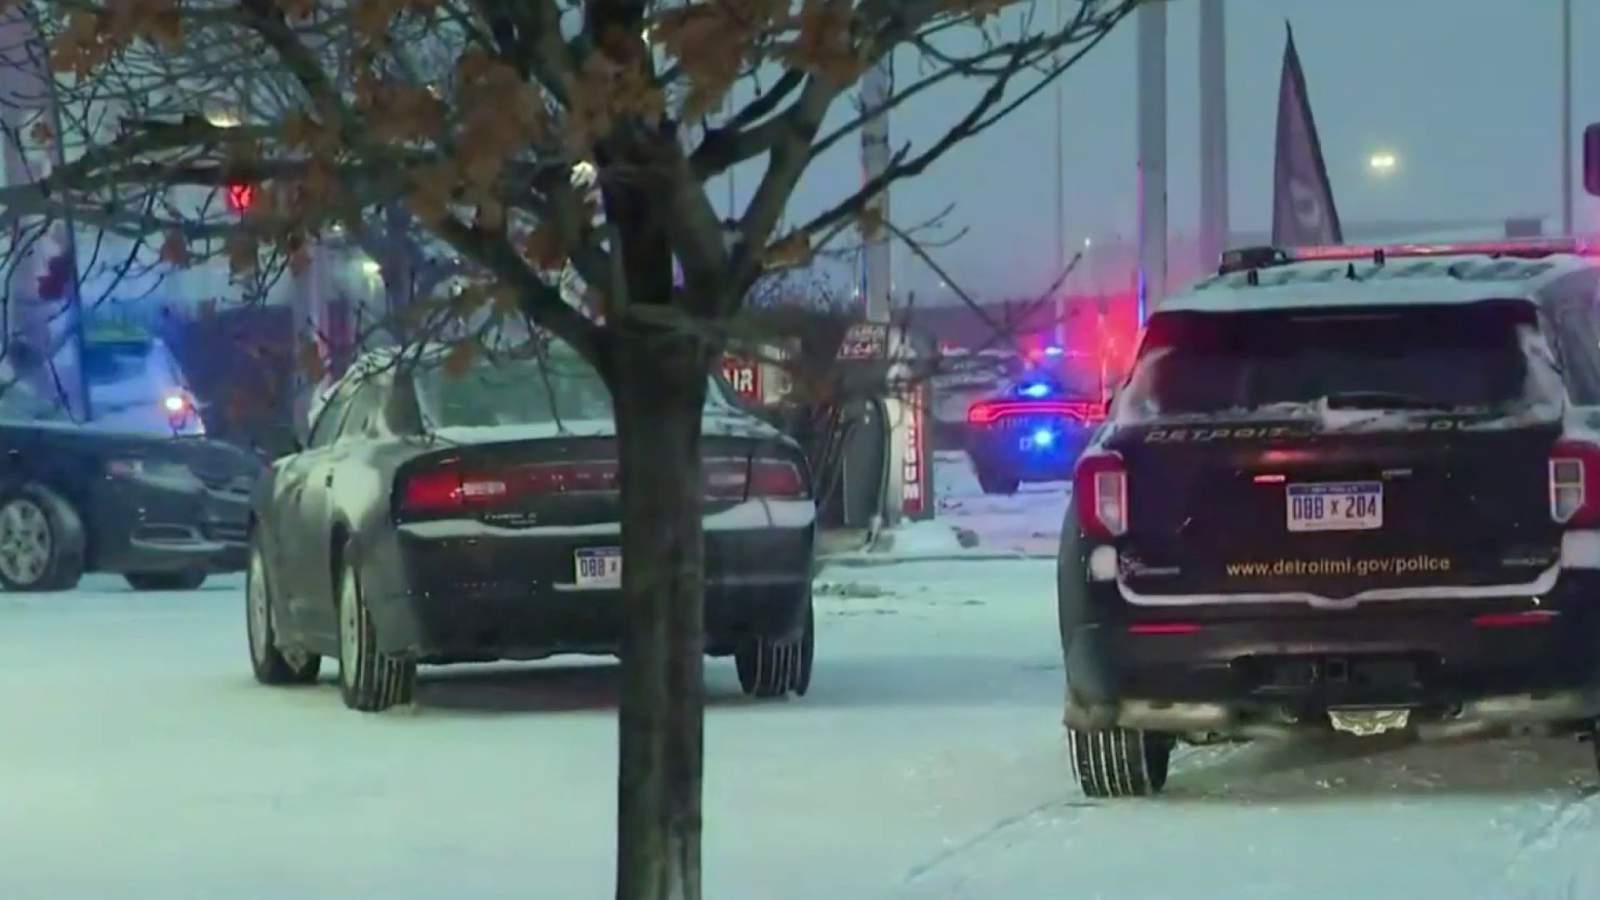 Armed man killed by Detroit police after woman’s murder, police station shooting, DPD says